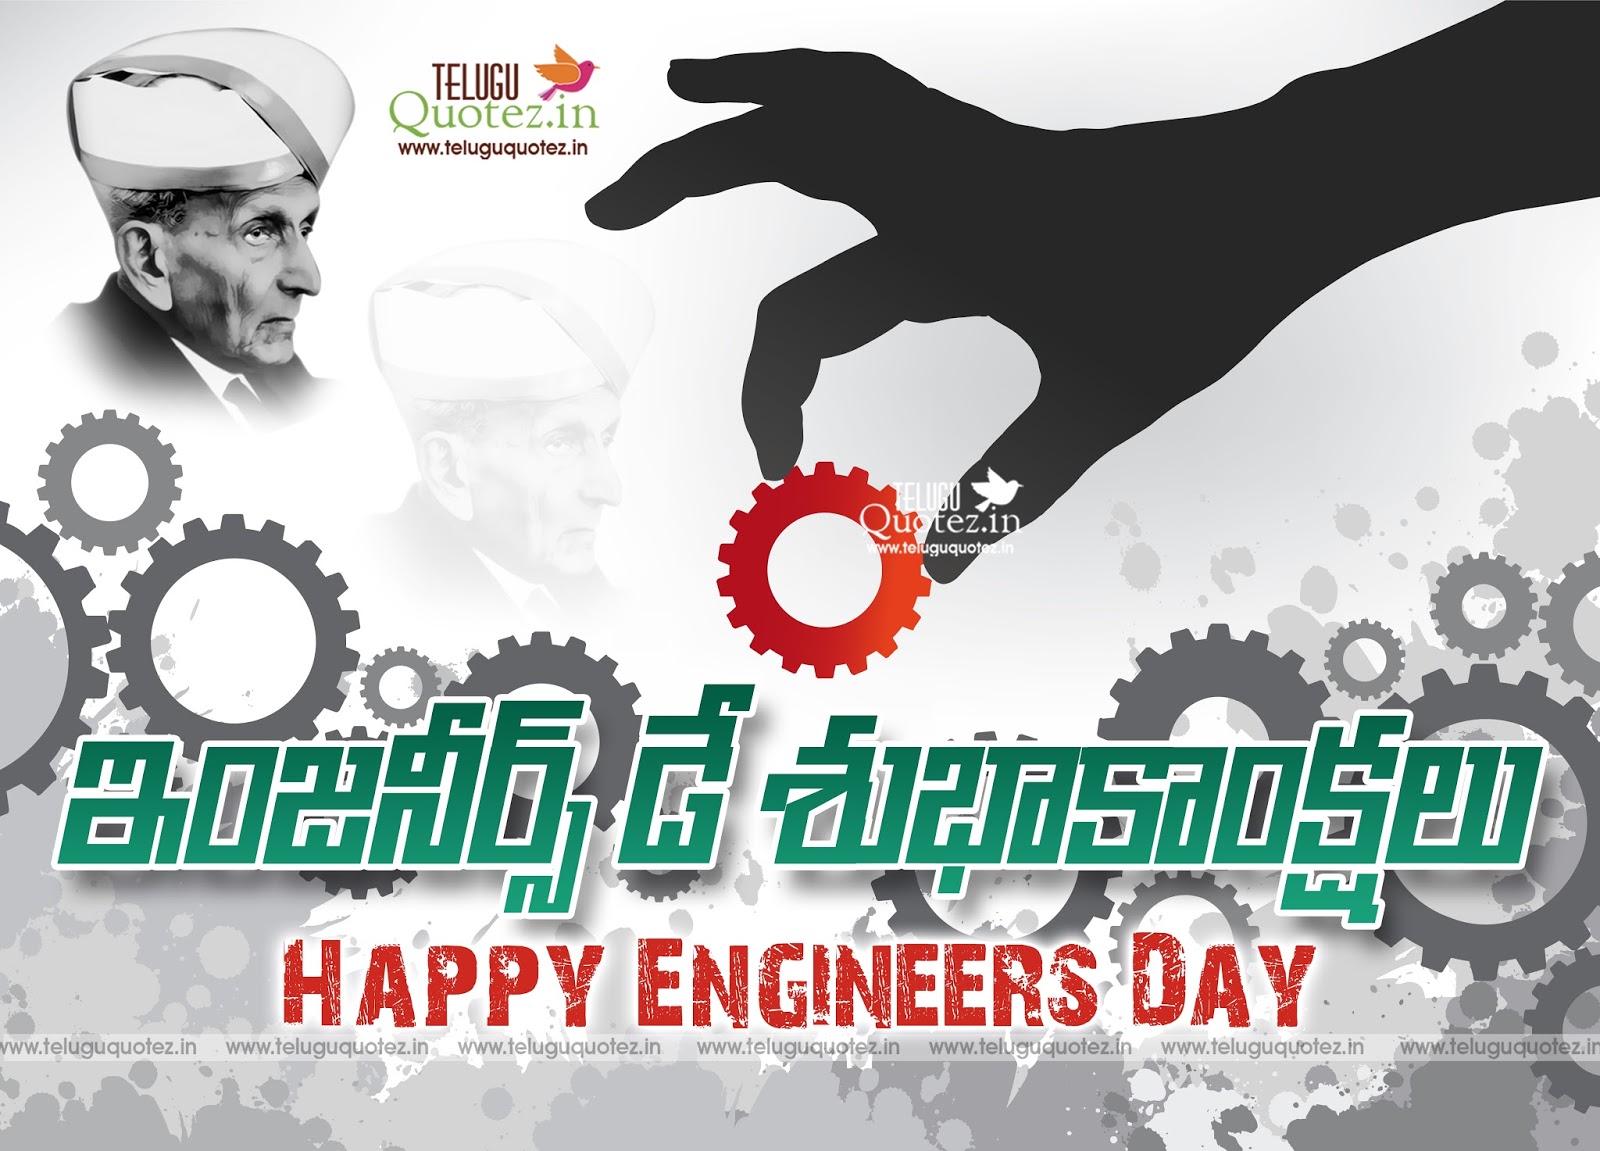 Happy Engineers Day Telugu Quotes And Greetings In Telugu Font